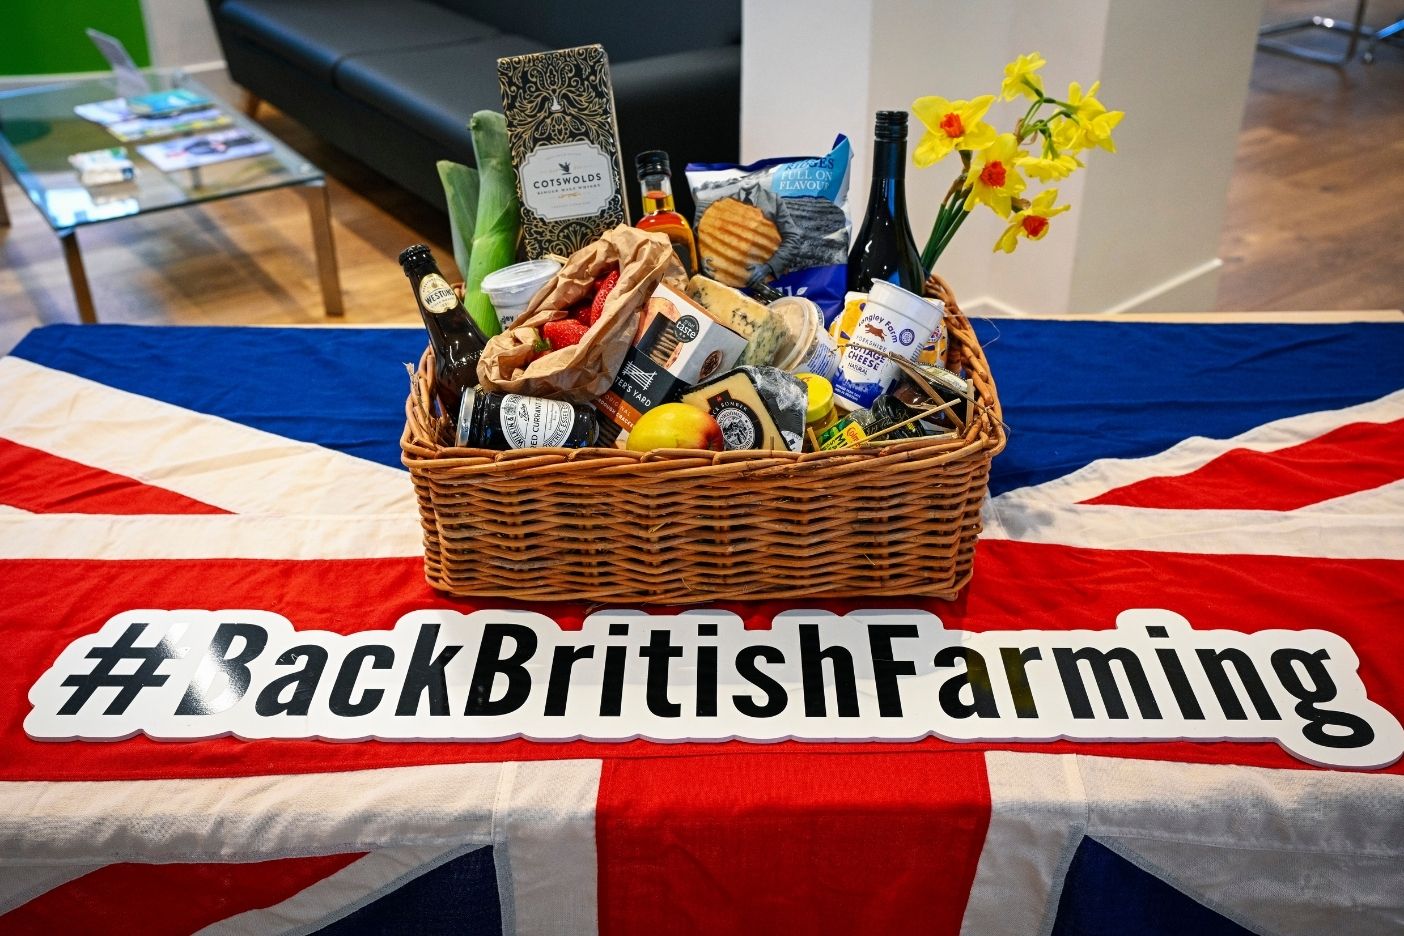 Backing British farming with goods that will be wanted right across the globe.